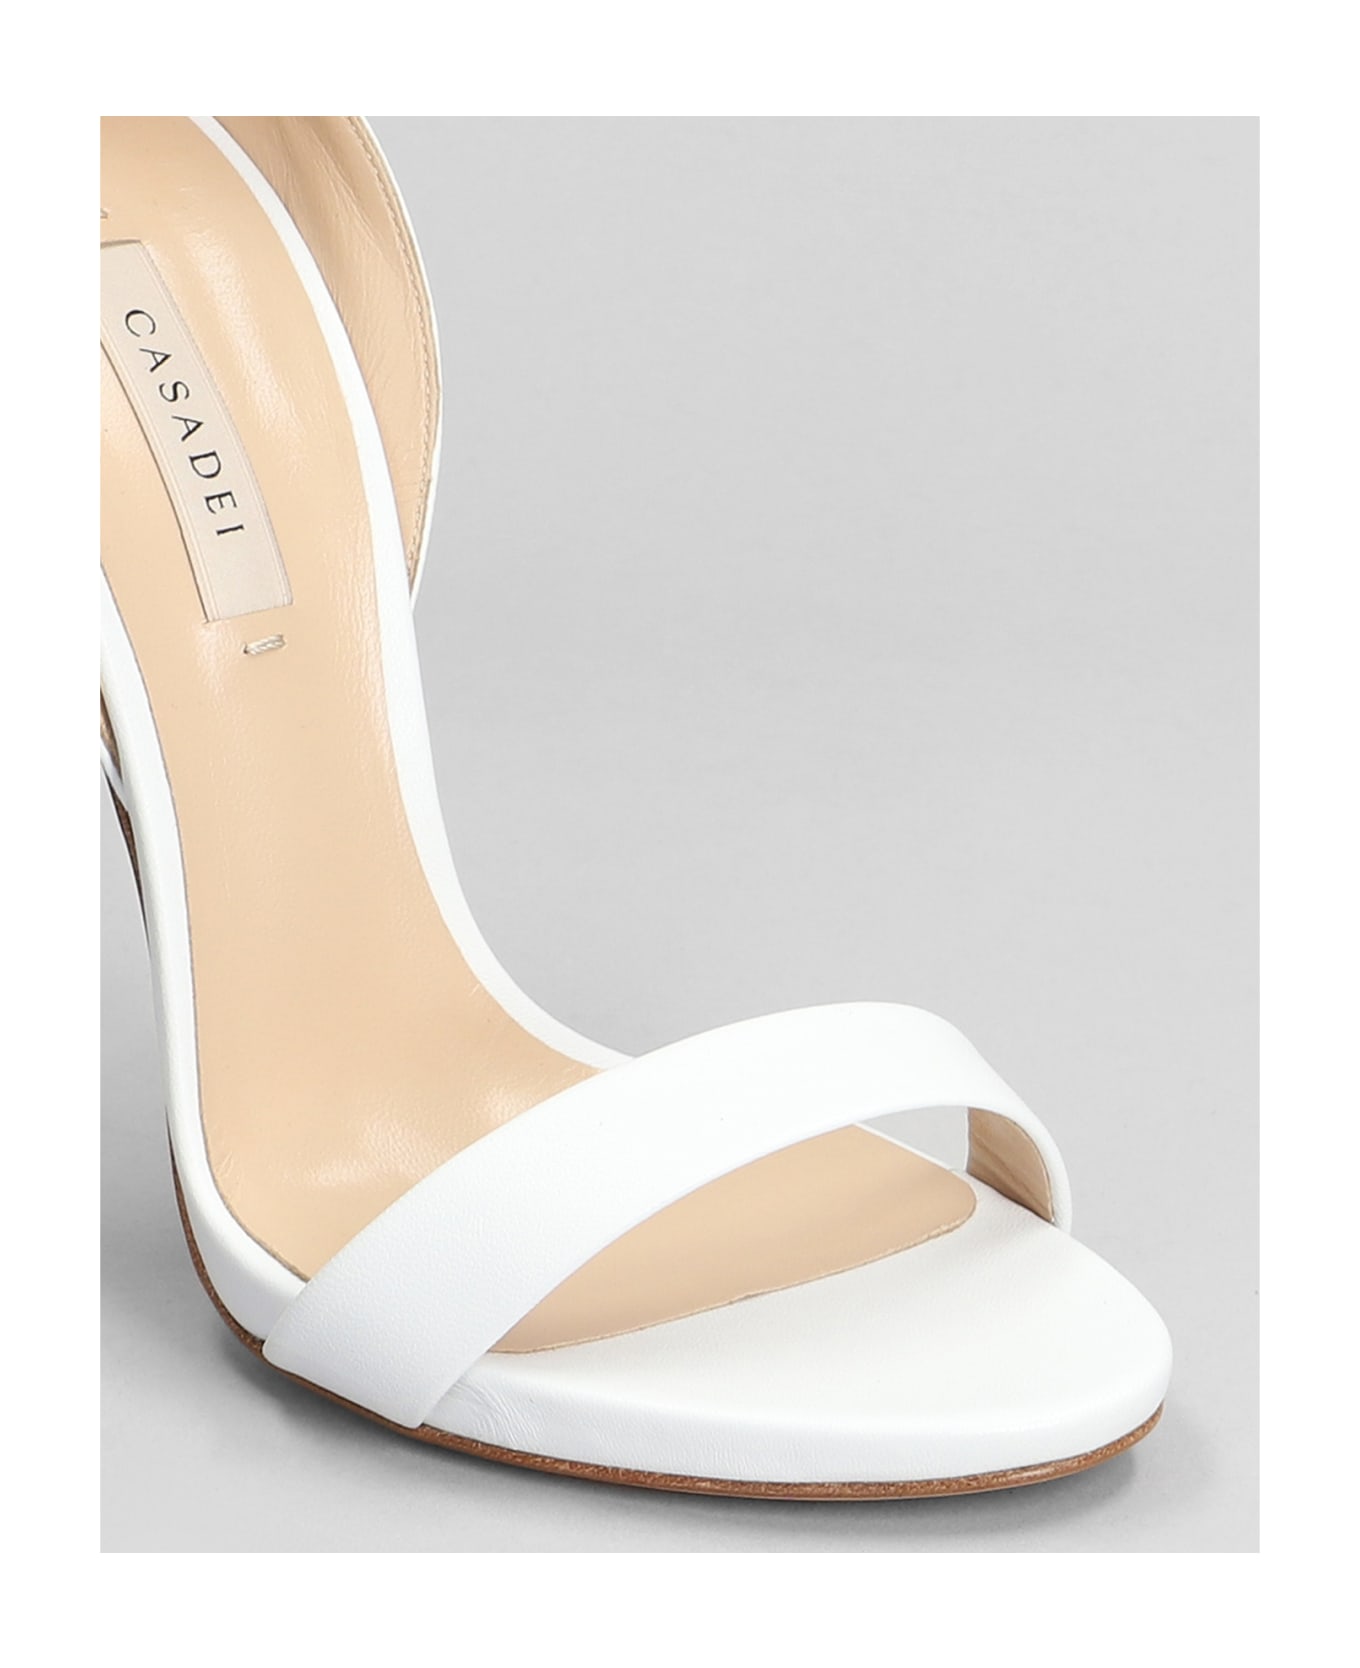 Casadei Blade Sandals In White Leather - white